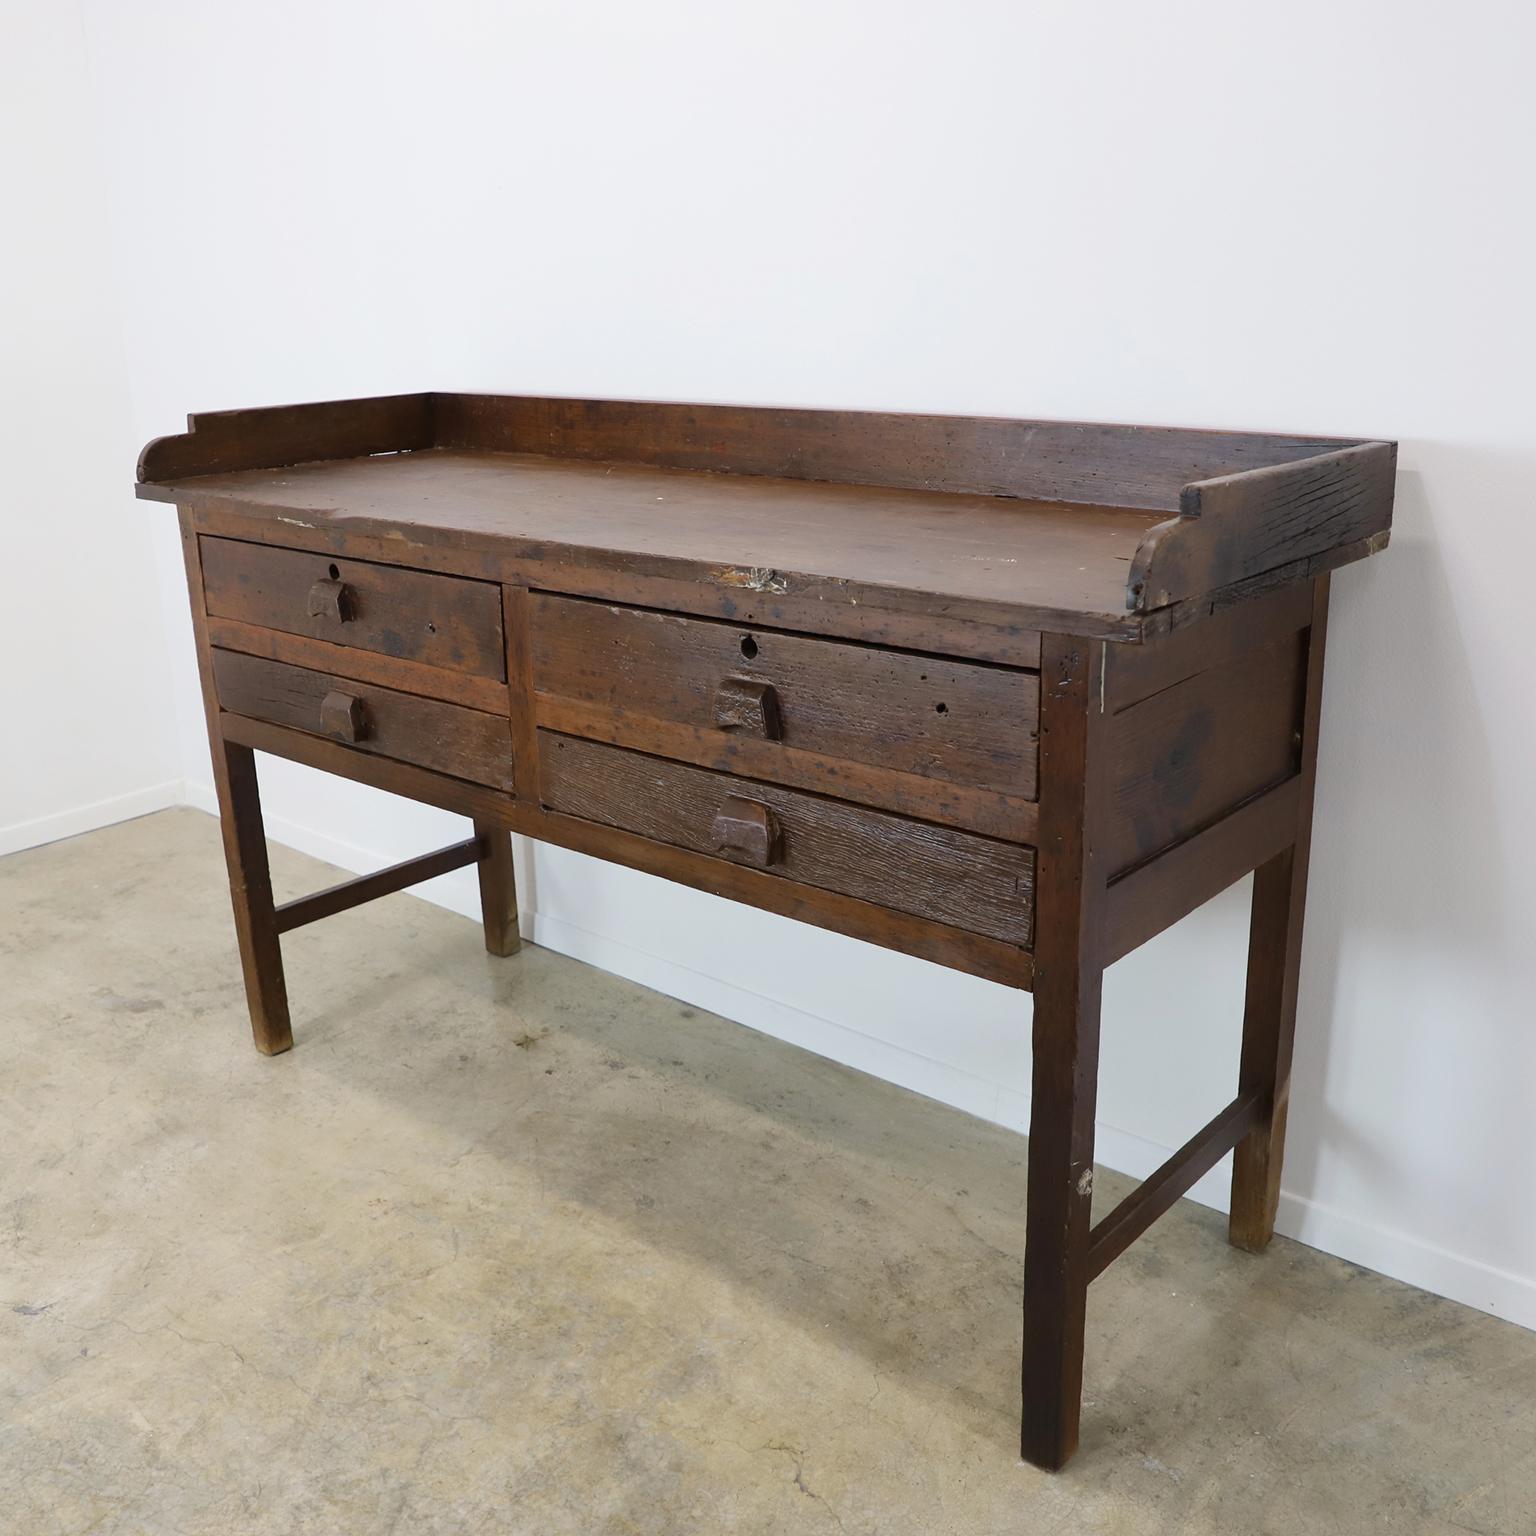 Circa 1930. We offer a most unique antique Mexican Industrial Jeweler's Bench Work Table with outstanding patina.

The stool and the typewriter is not included.